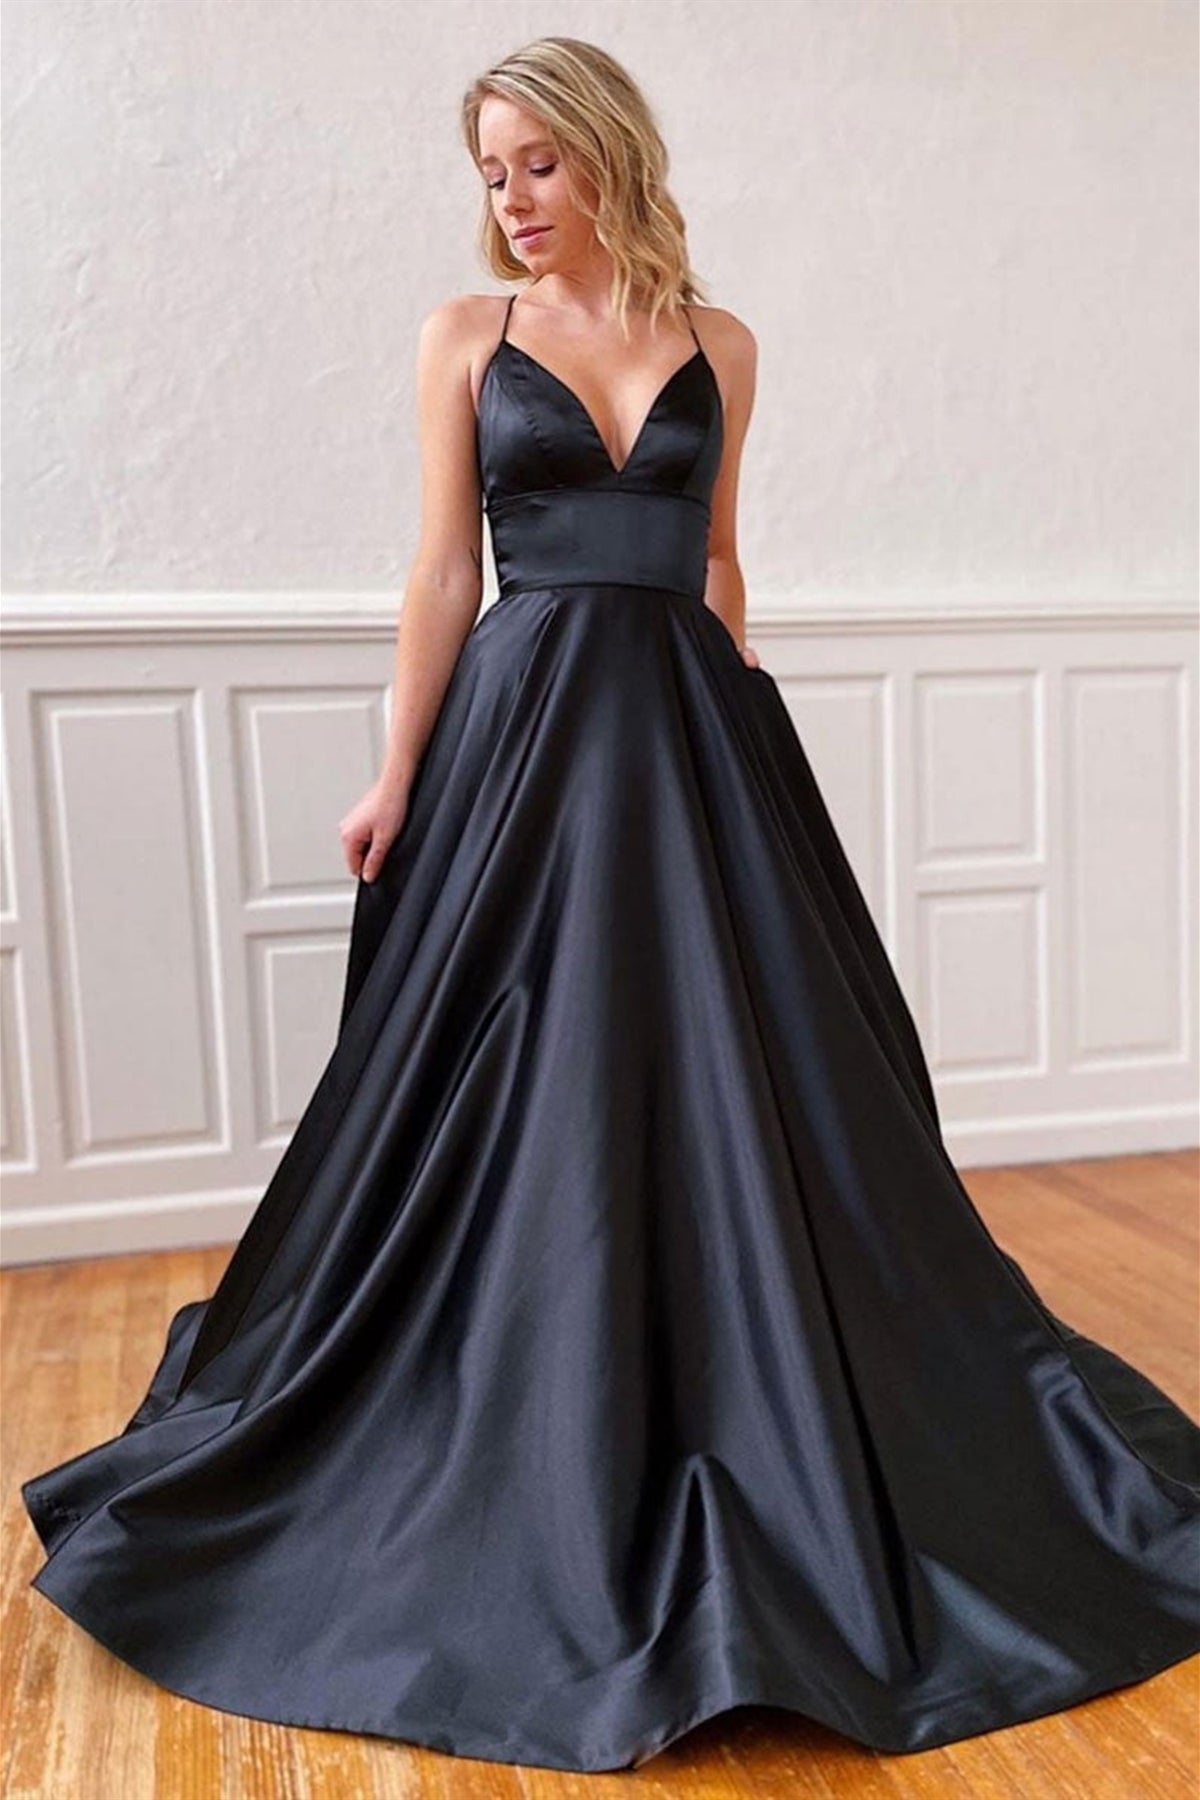 Black Satin Plunging Neck Puffy A-line Formal Gown - Xdressy